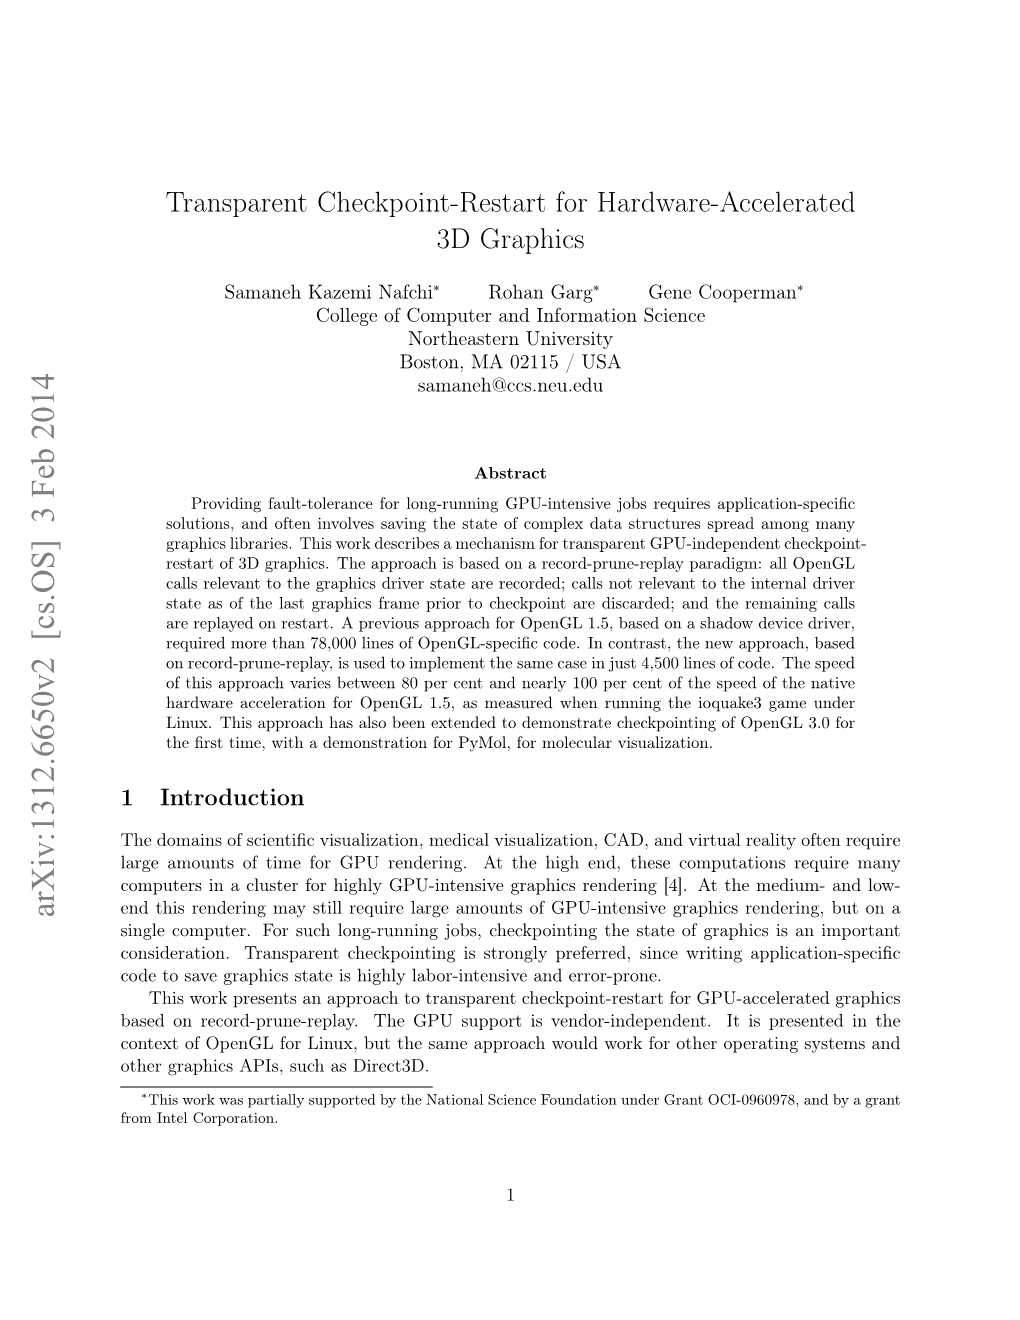 Transparent Checkpoint-Restart for Hardware-Accelerated 3D Graphics